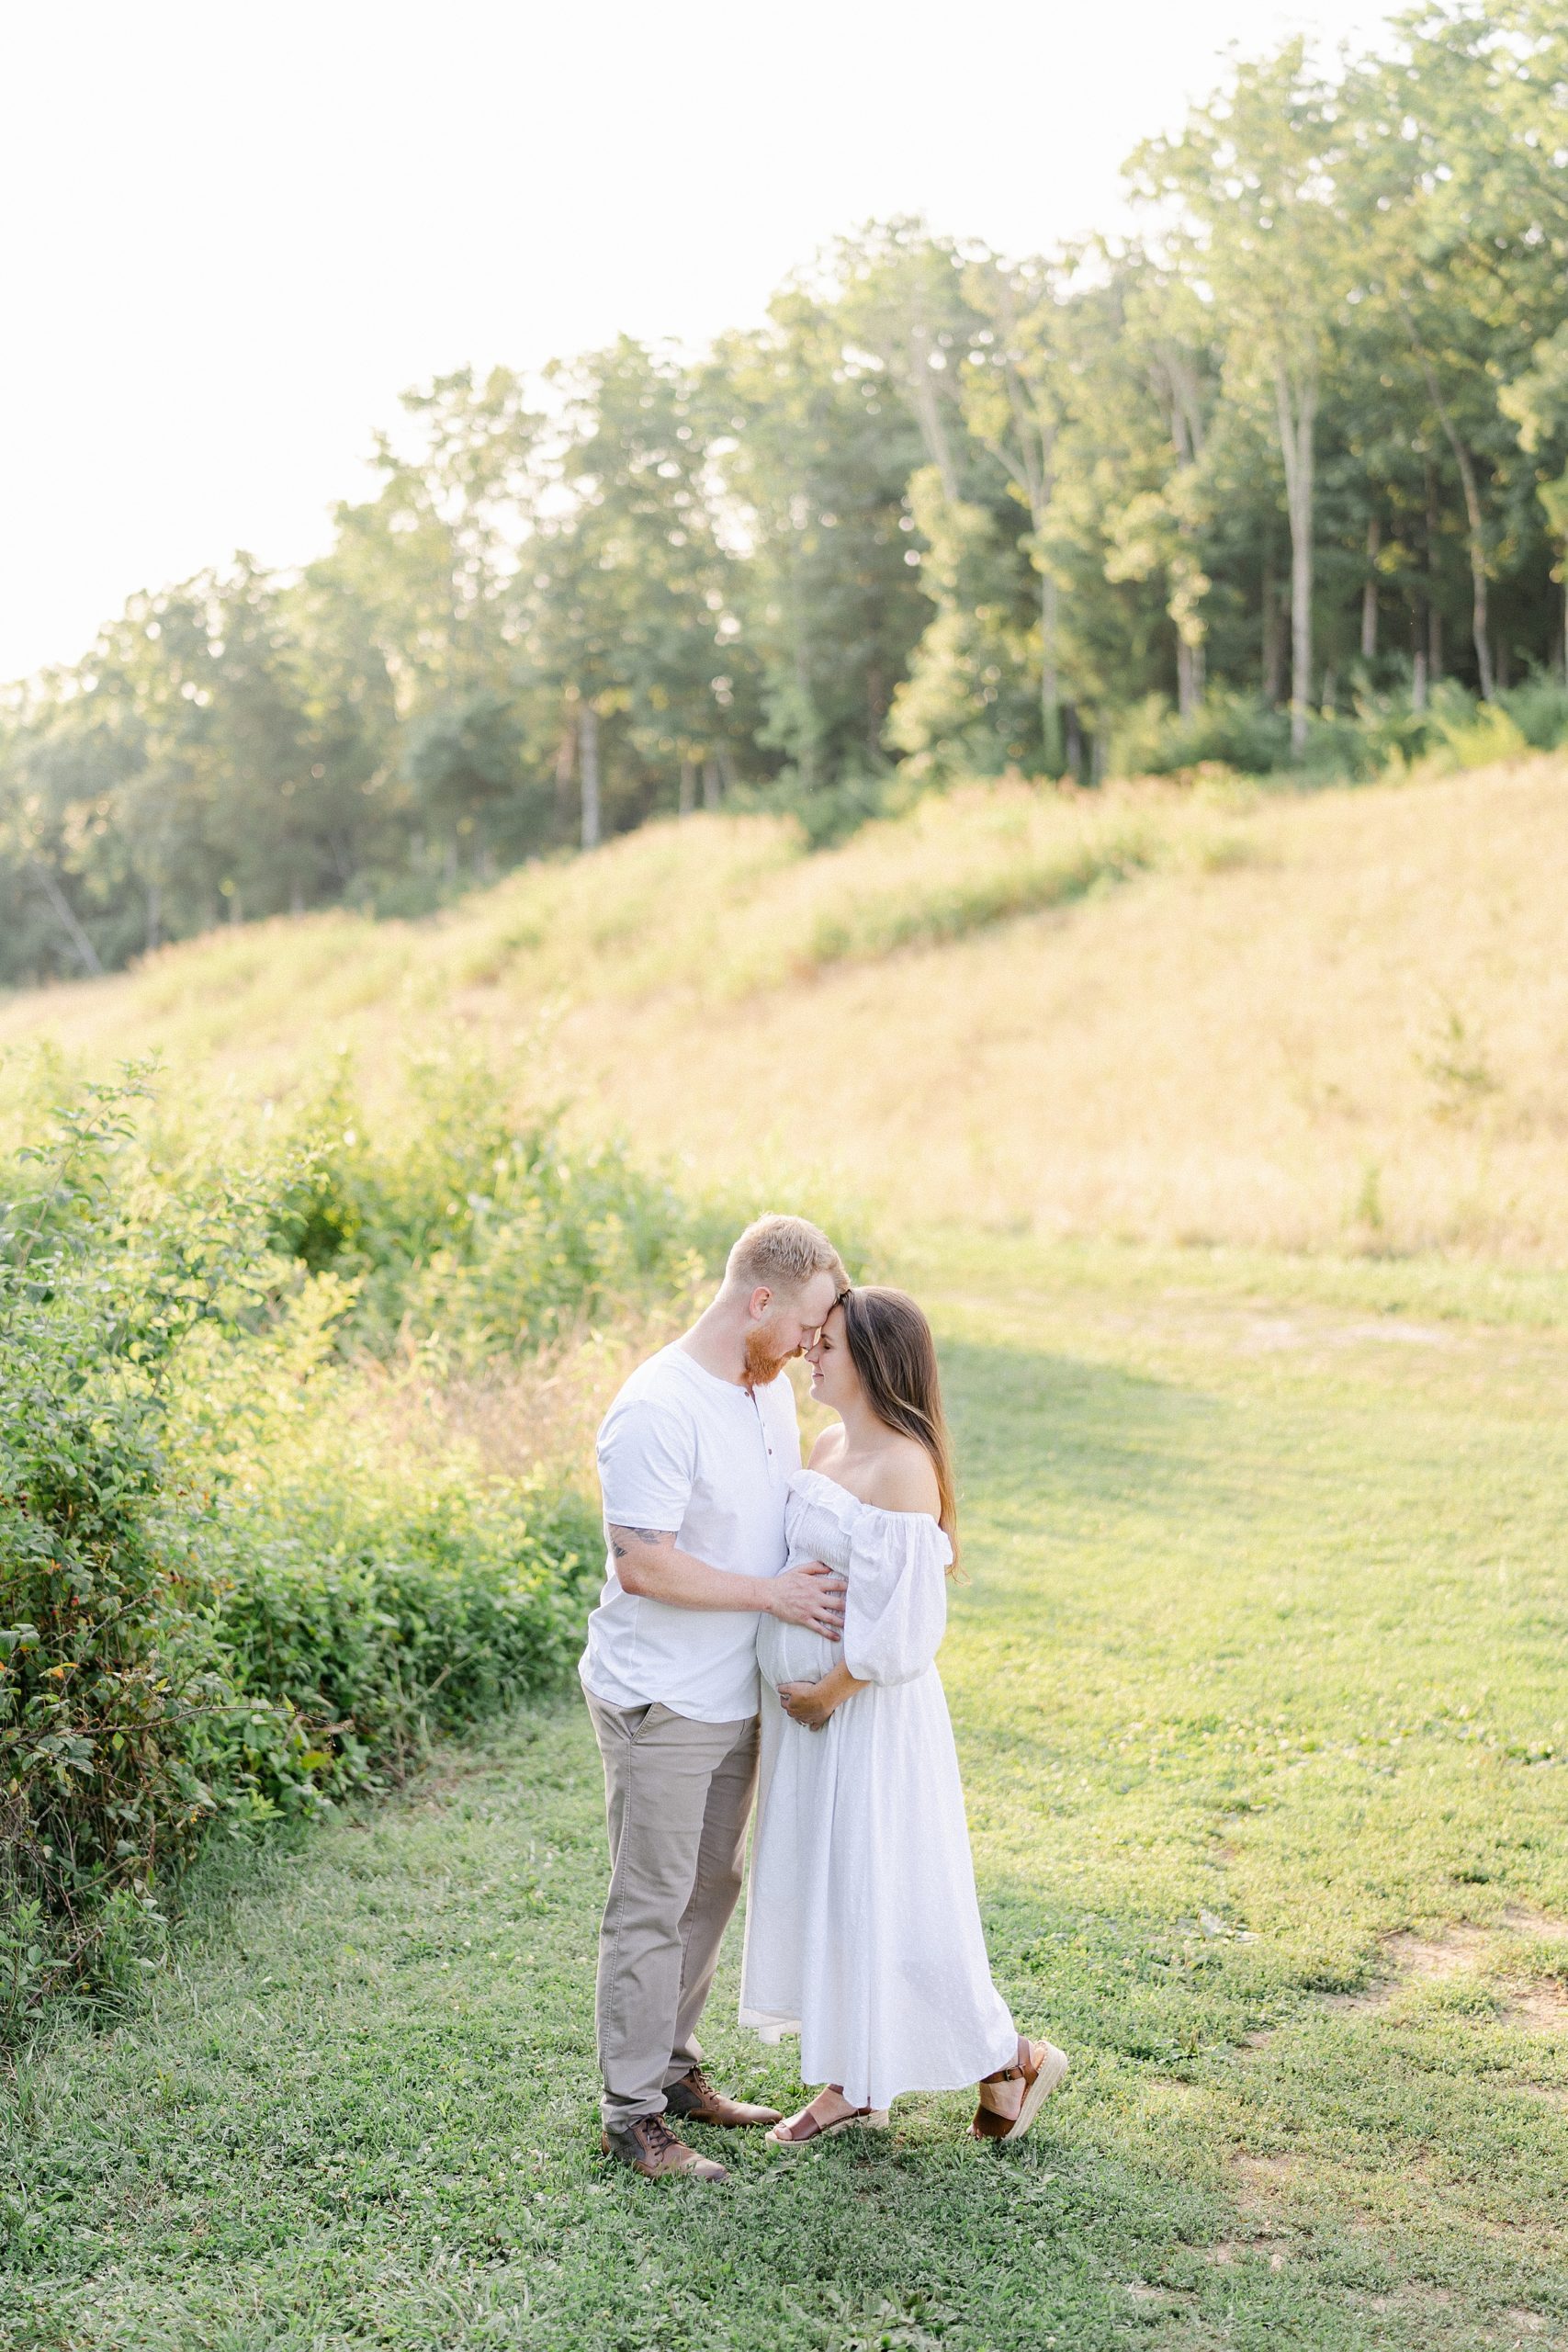 Couple in grass field during Brentwood, TN Maternity Session photographed by Grace Paul Photography